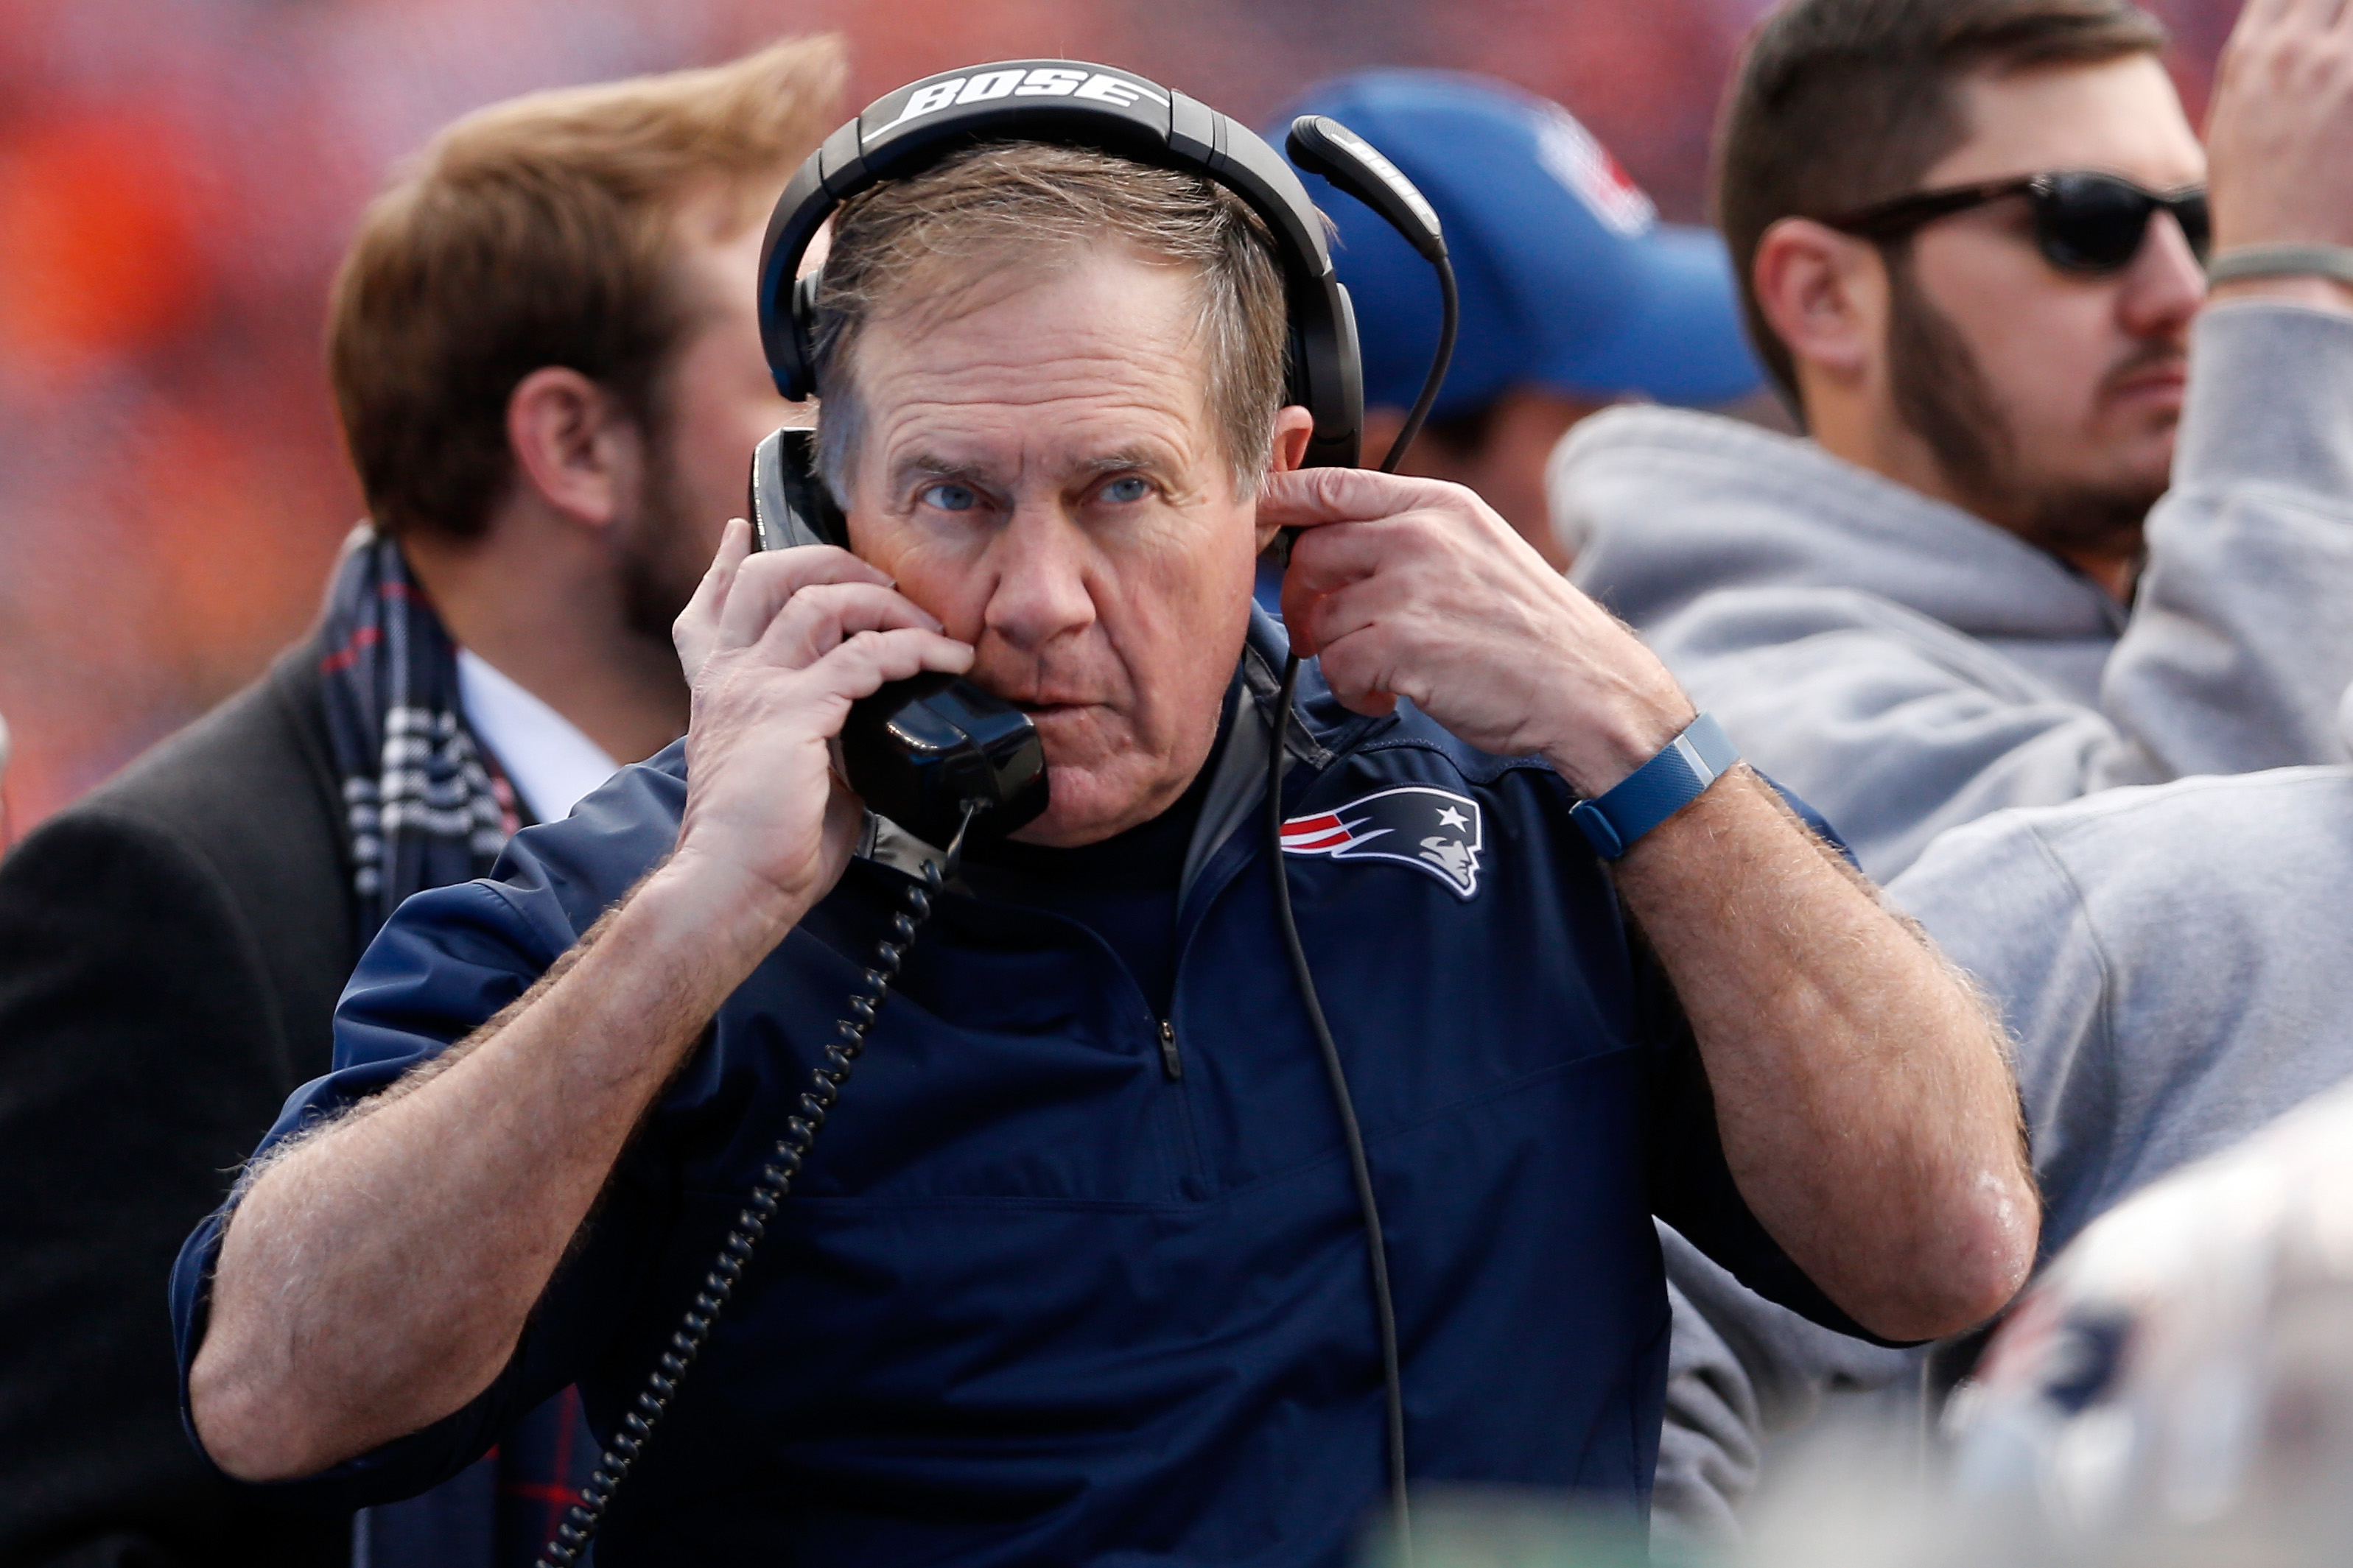 New England Patriots head coach Bill Belichick uses a phone on the sideline.